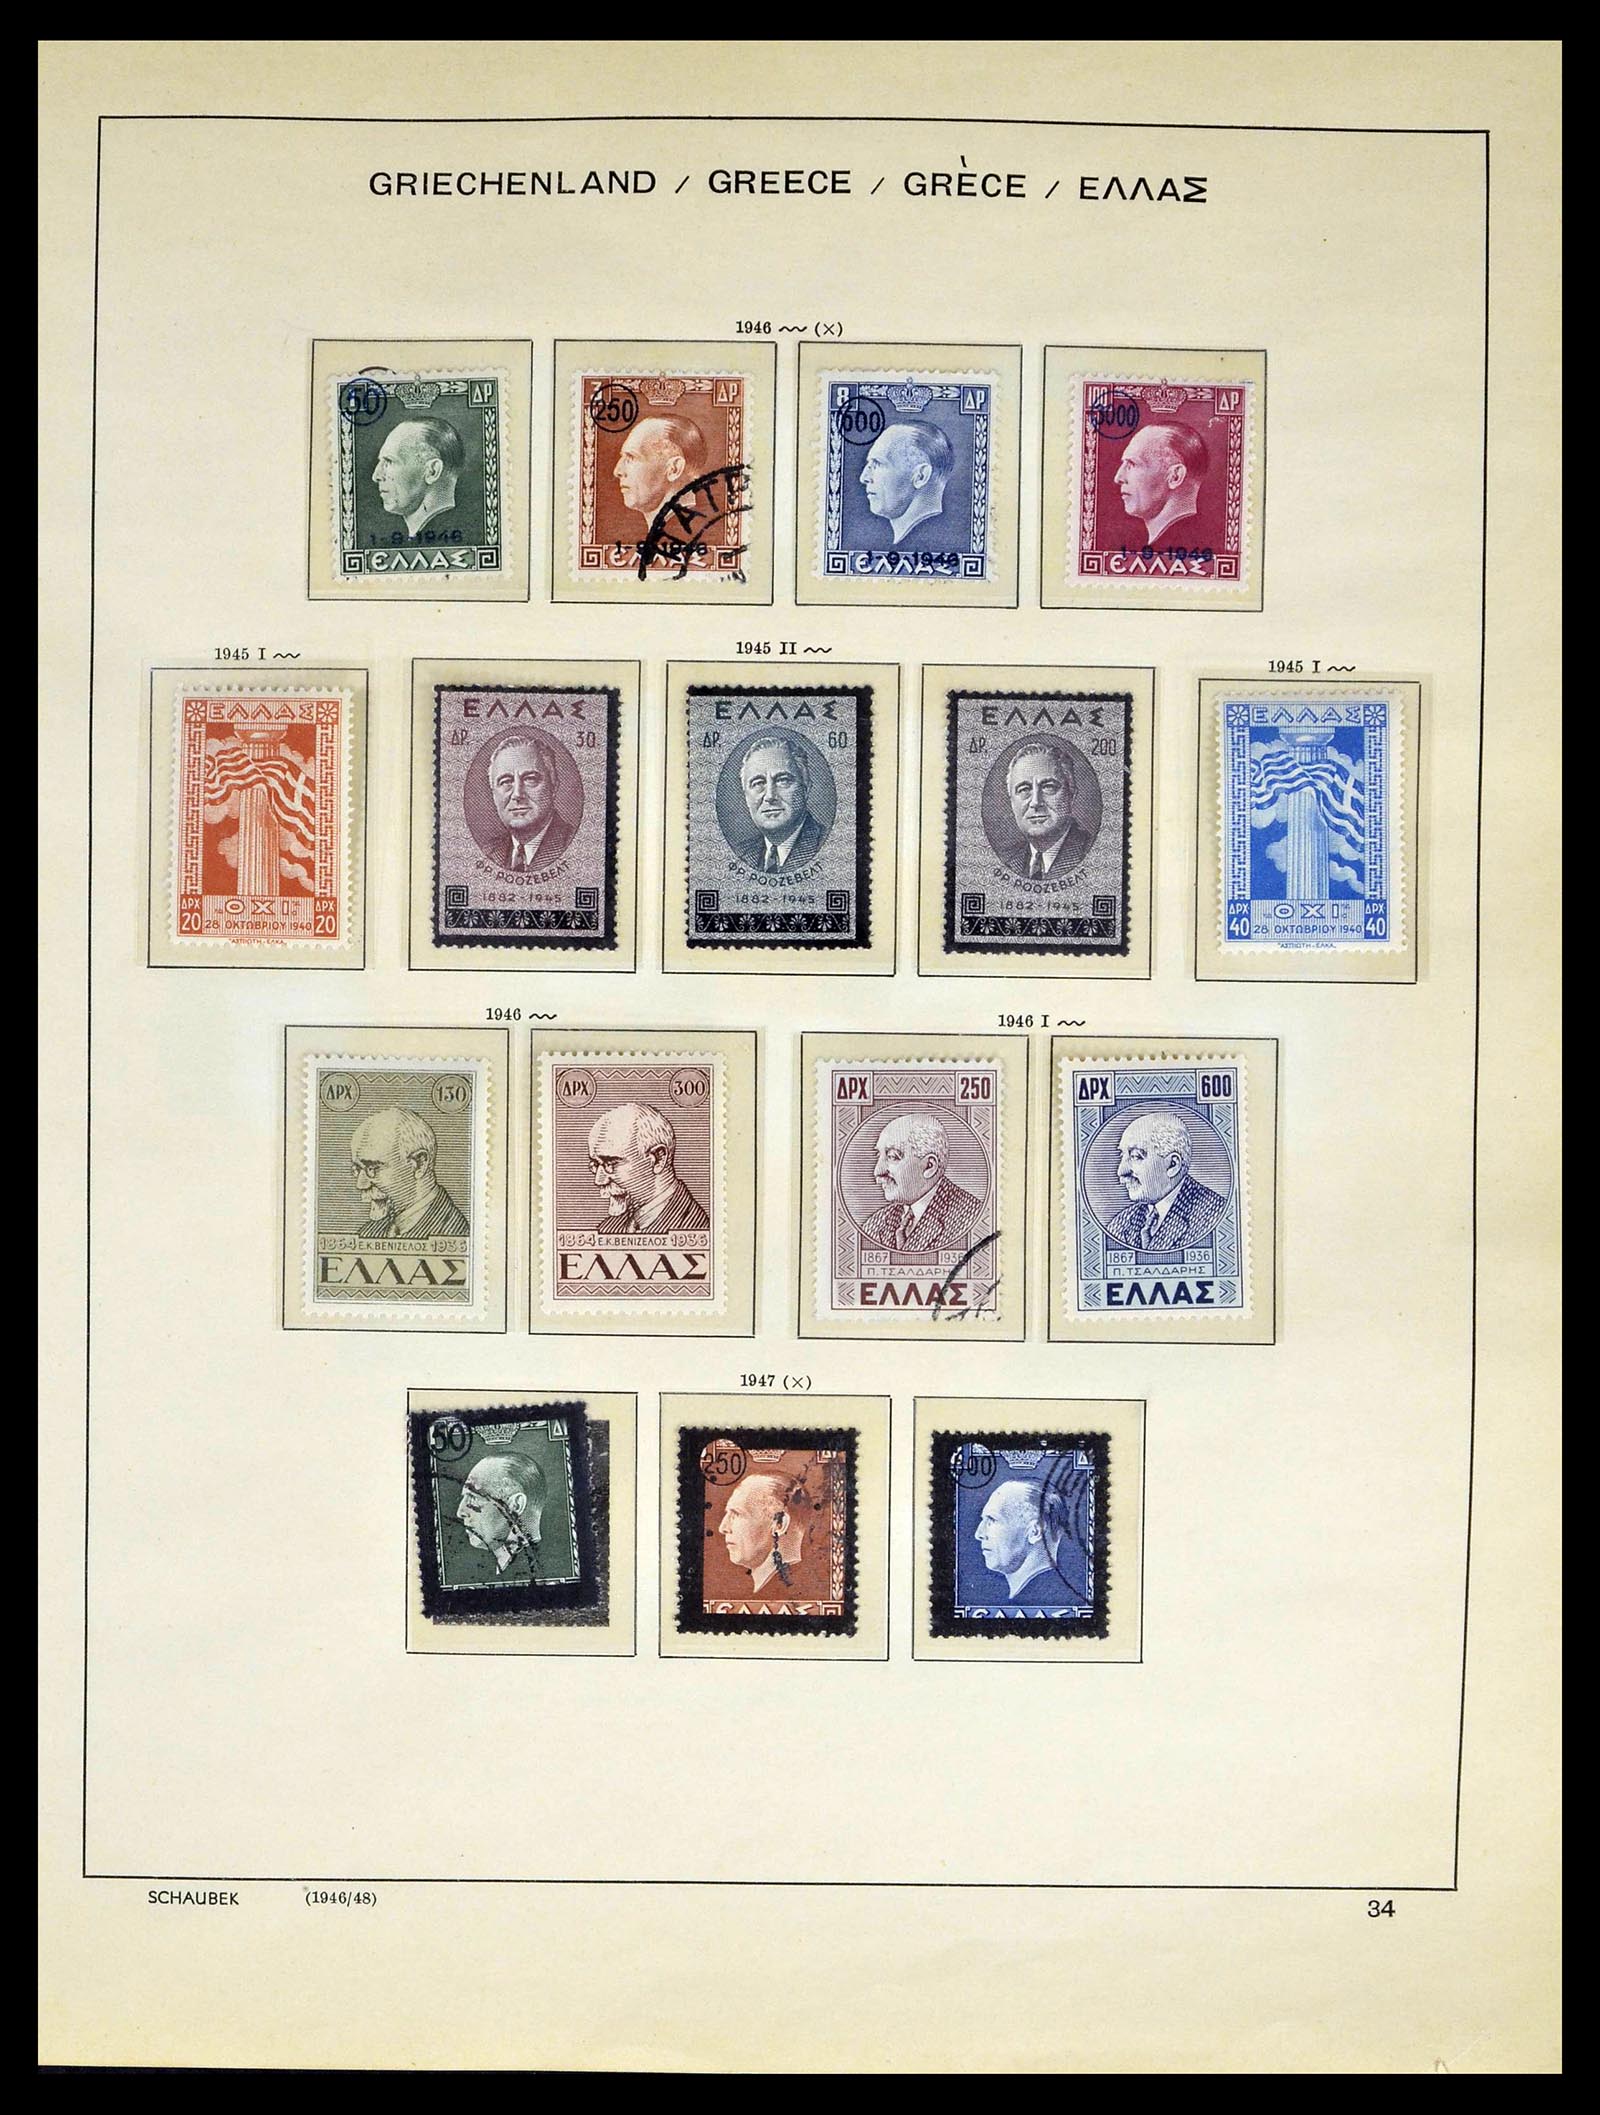 39156 0033 - Stamp collection 39156 Greece 1861-1996.